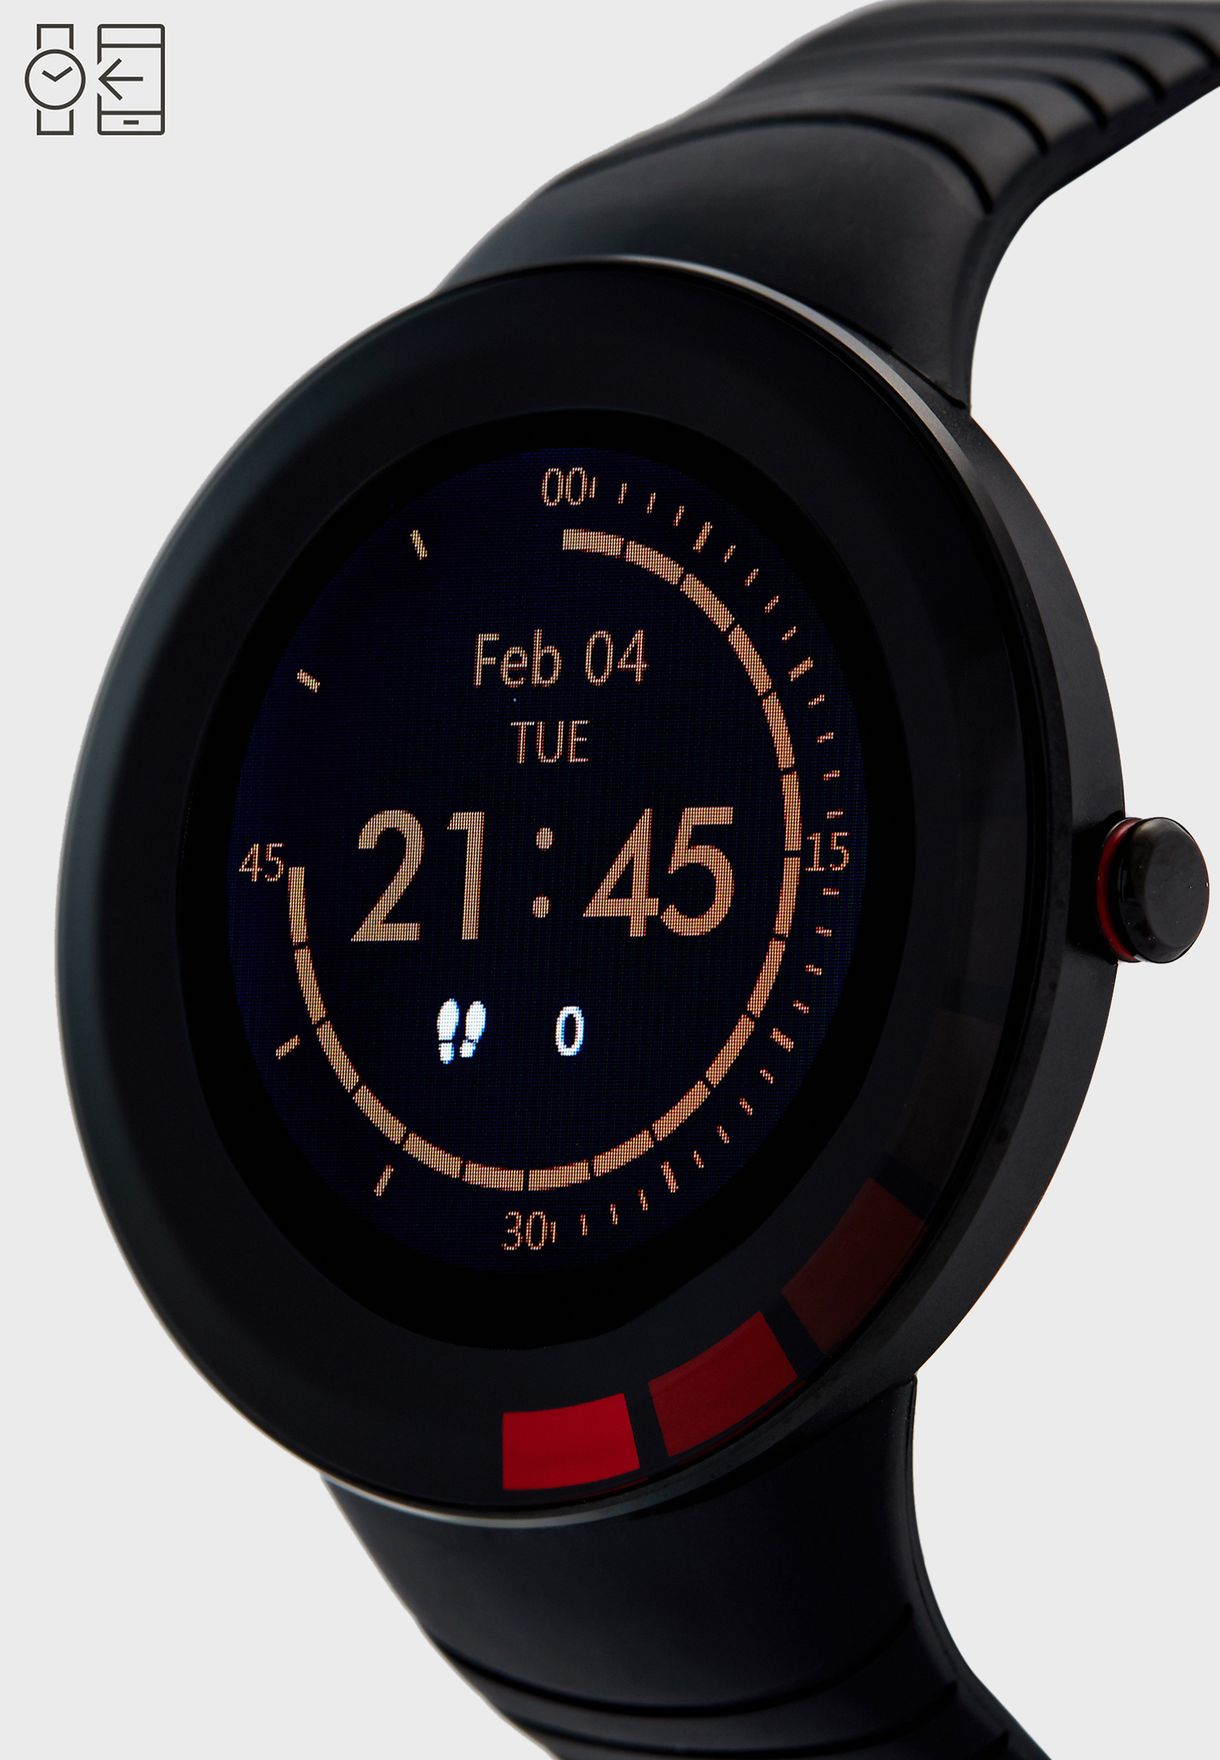 Smart Watch With GPS Tracking, Heart Rate Measure